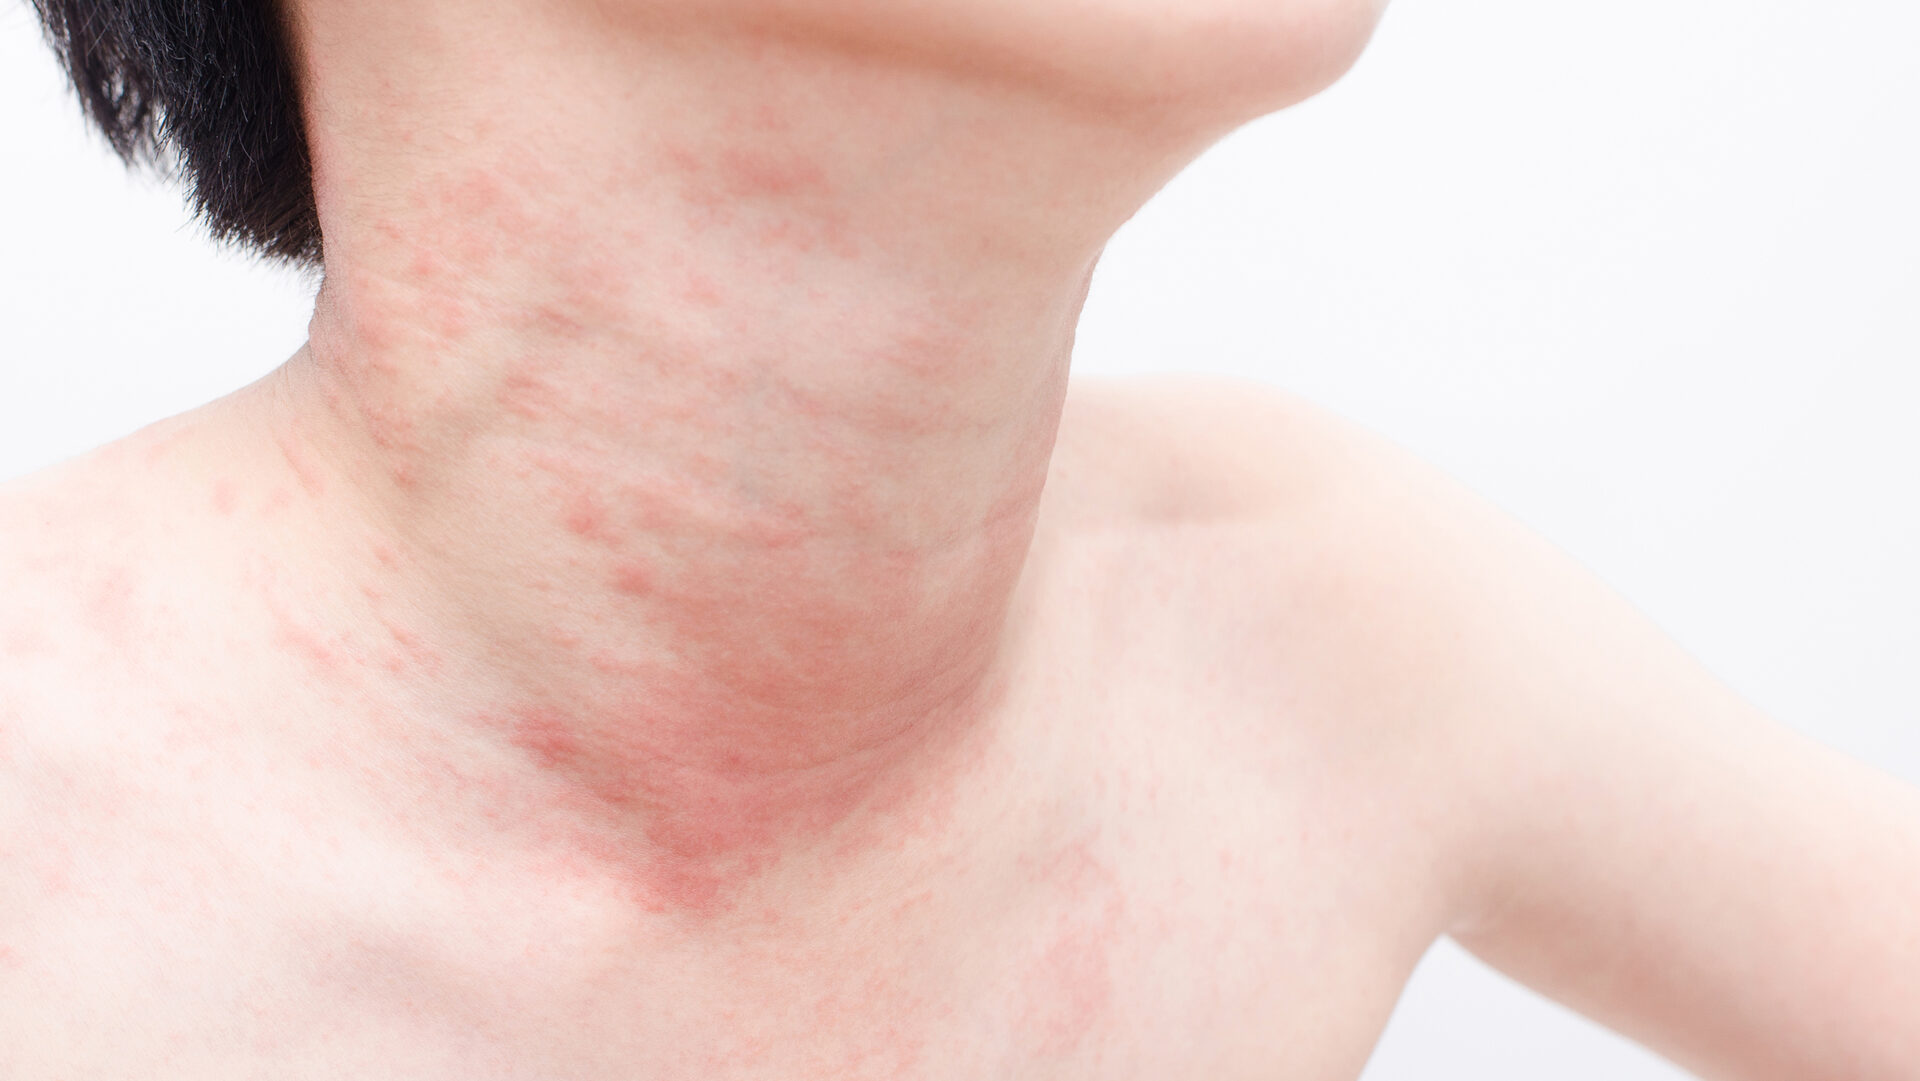 rash-on-neck-meaning-causes-itchy-red-bumpy-rash-diagnosis-and